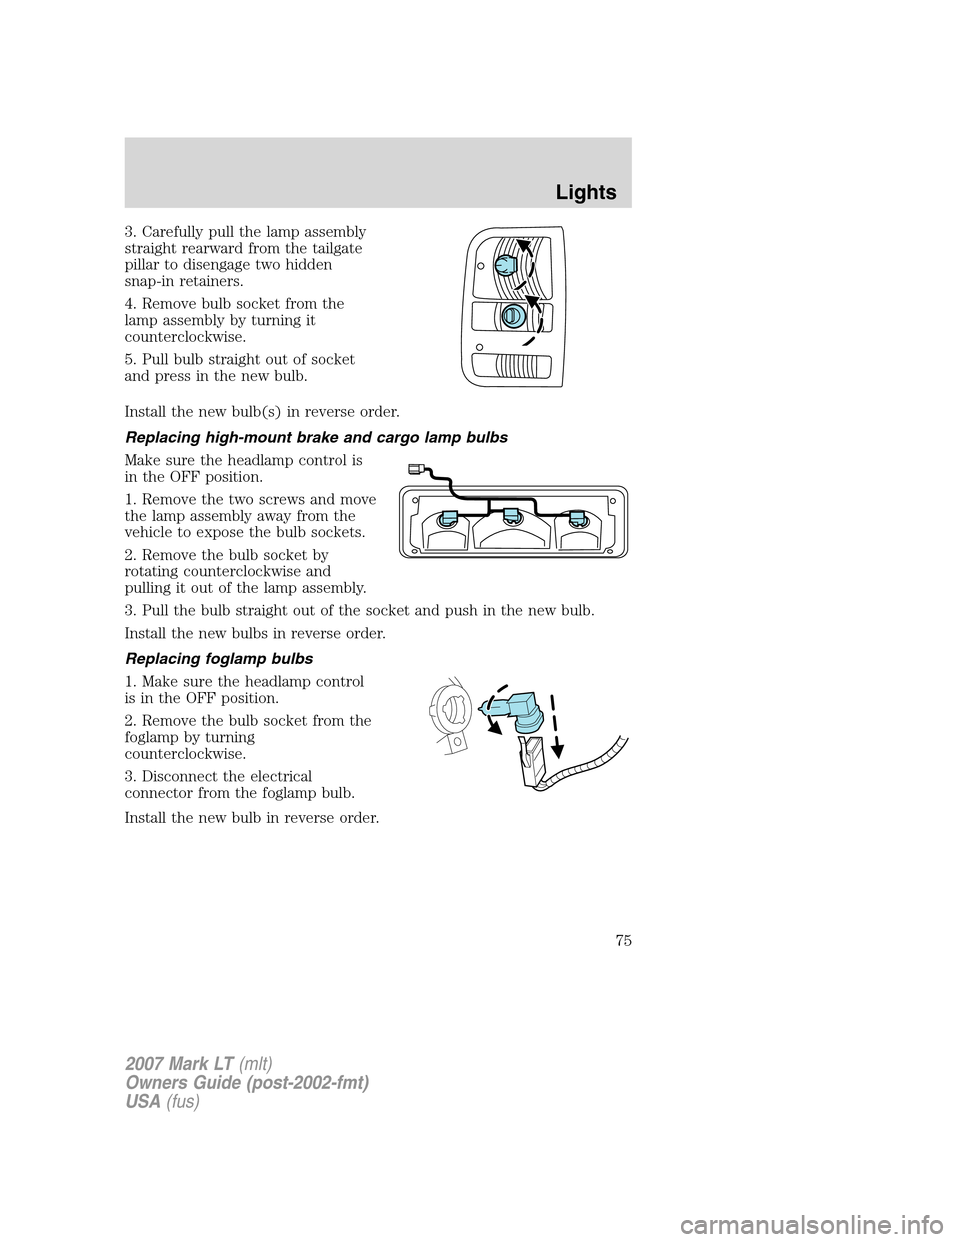 LINCOLN MARK LT 2007  Owners Manual 3. Carefully pull the lamp assembly
straight rearward from the tailgate
pillar to disengage two hidden
snap-in retainers.
4. Remove bulb socket from the
lamp assembly by turning it
counterclockwise.
5